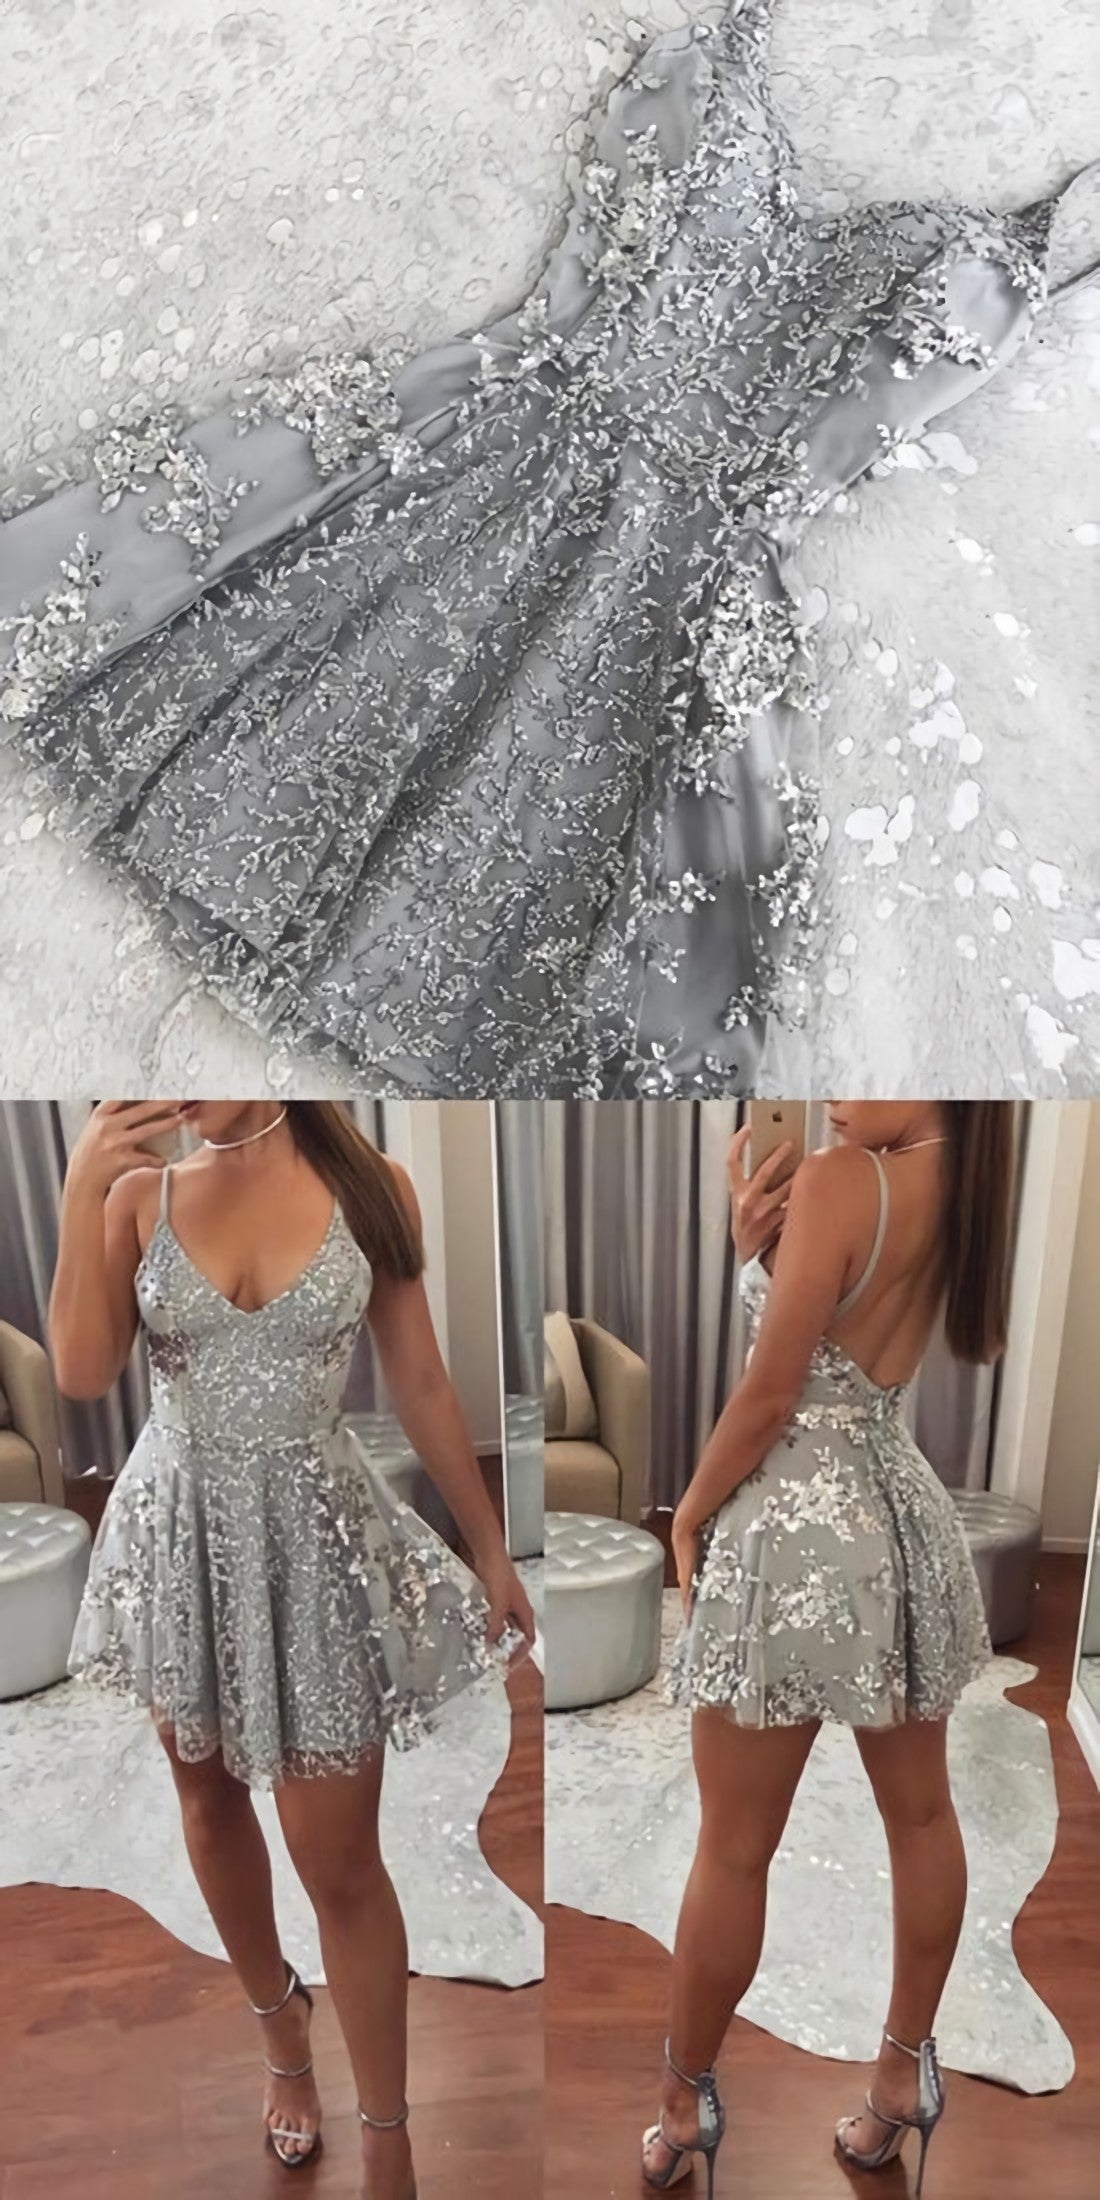 Charming Lace Corset Prom Dress, Sexy Short Corset Prom Dress, Spaghetti Straps Corset Prom Gowns Corset Homecoming Dress, Hot Gowns, Formal Dressed Long Gowns